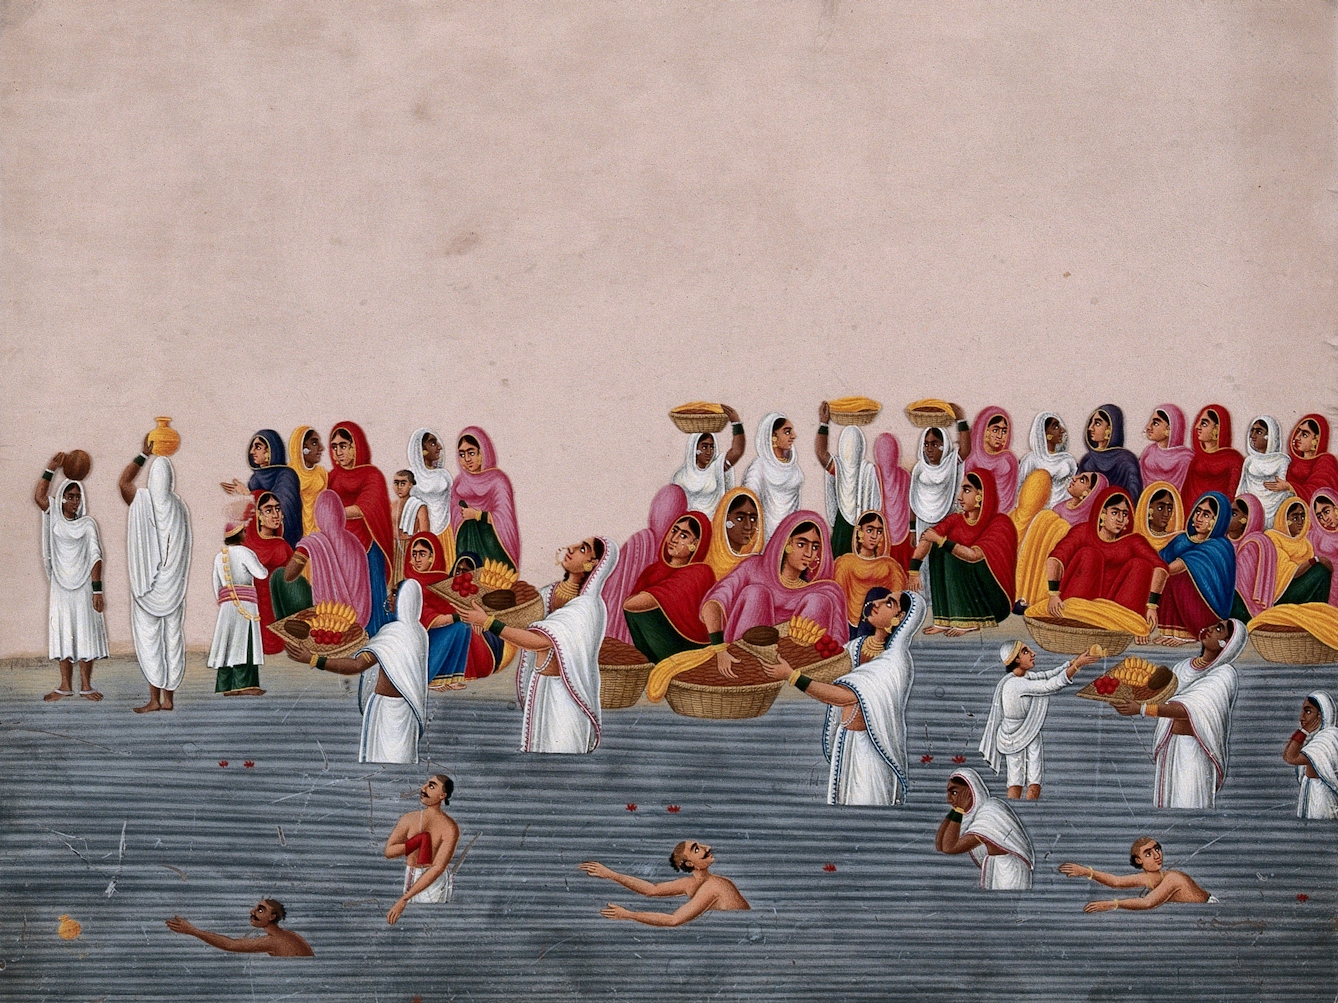 Gouache painting showing people bathing and praying at the River Ganges.